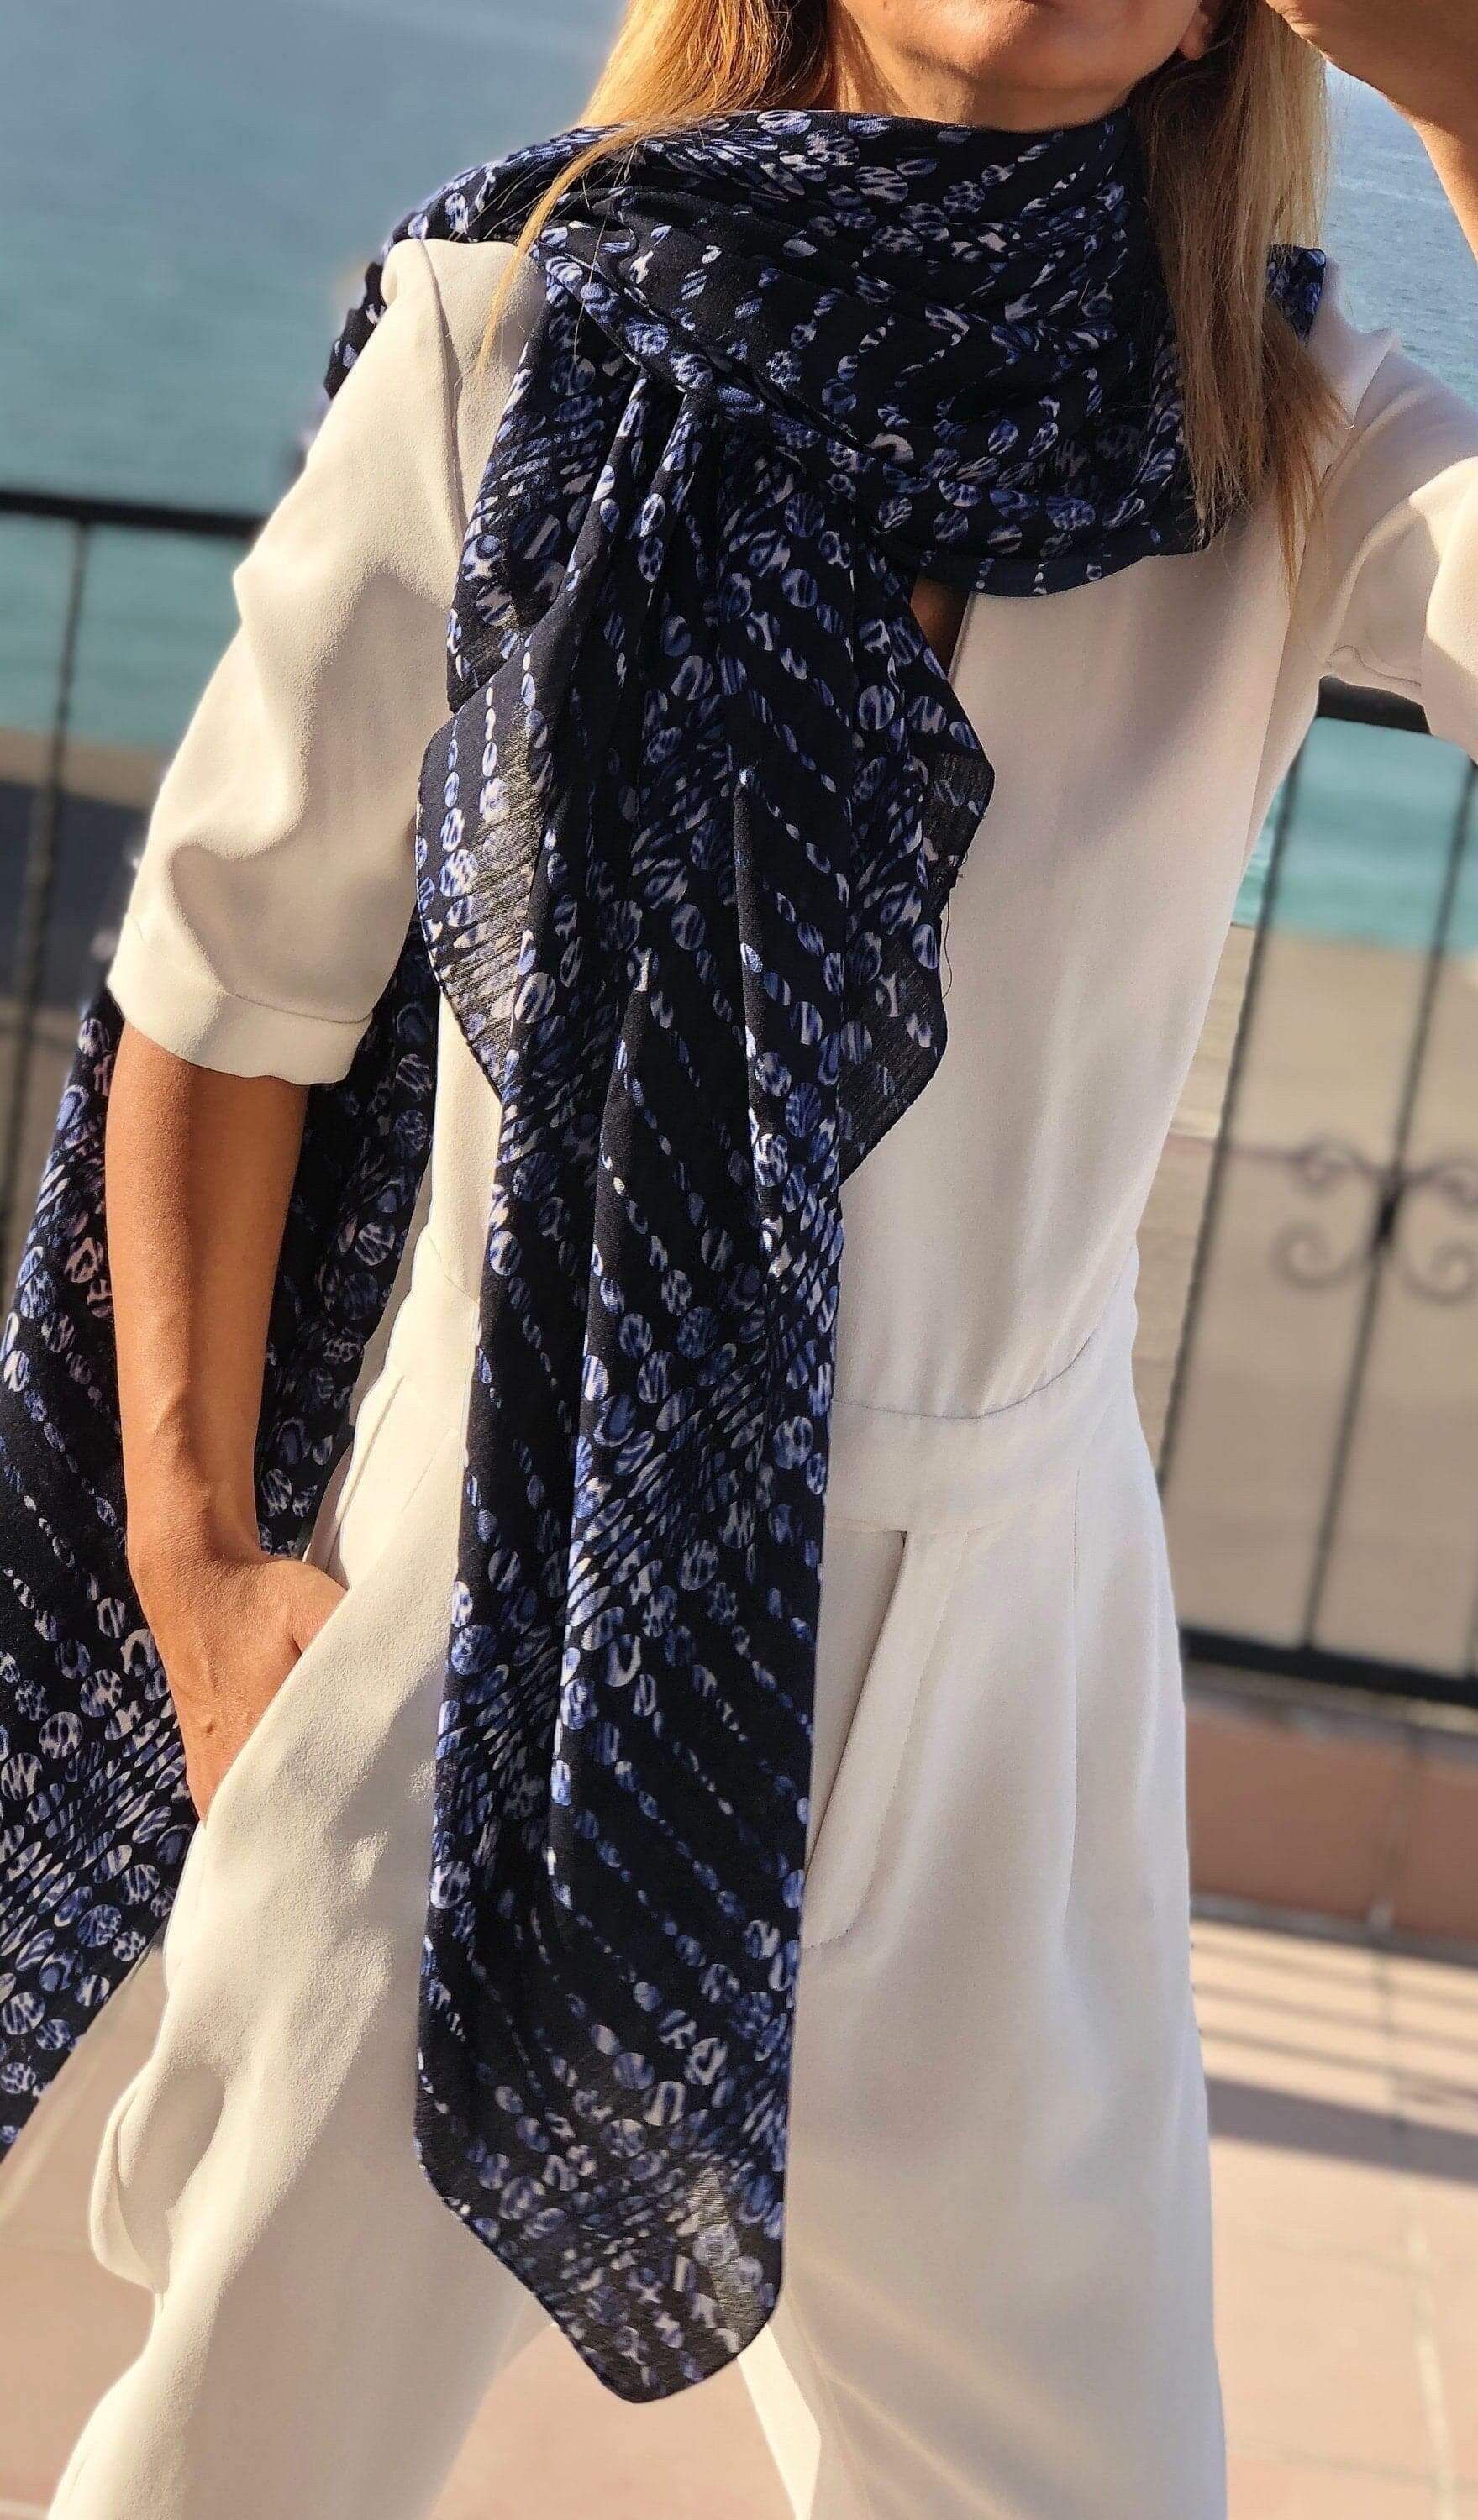 Best Gift for Woman - Surprise your loved one with this beautiful and practical cotton scarf.